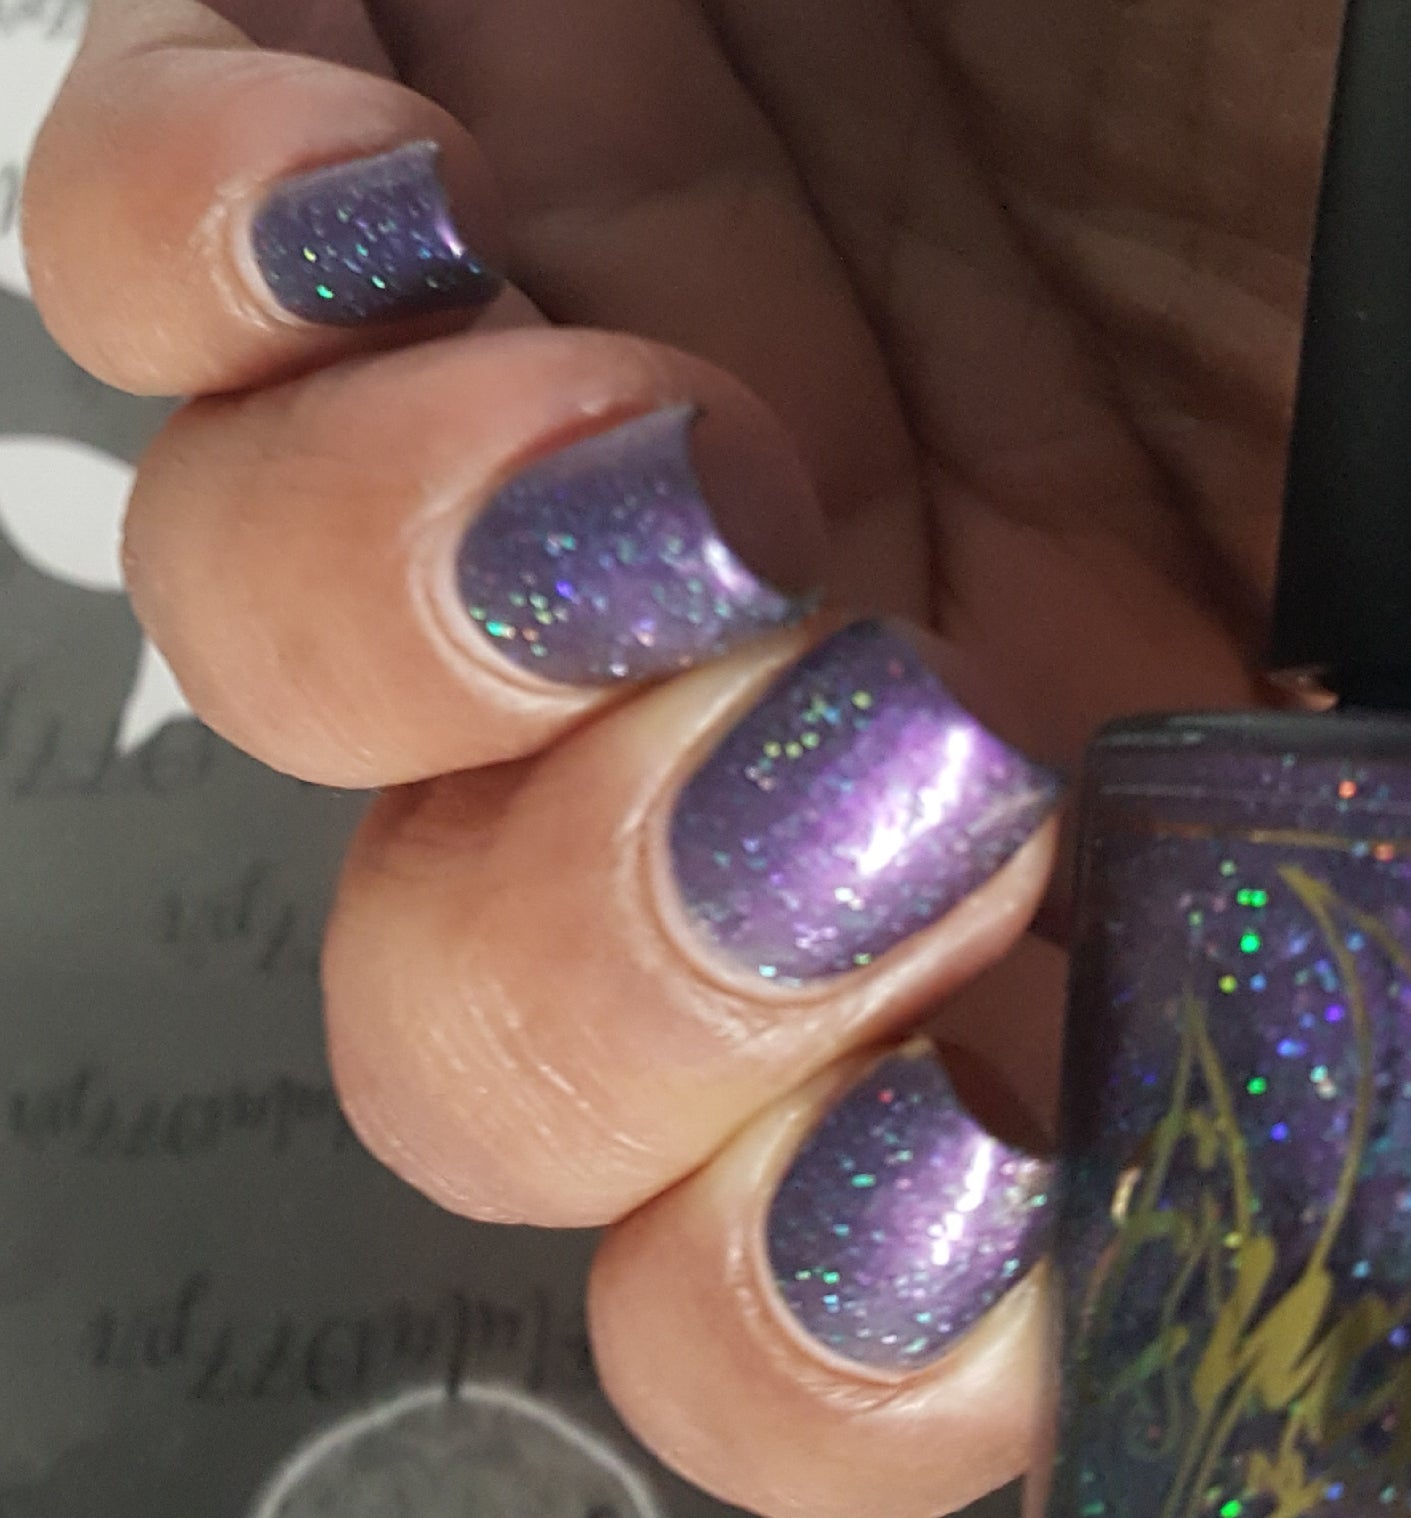 shorter nails still look amazing with coats of Broken Ankle glitter and holographic flakes